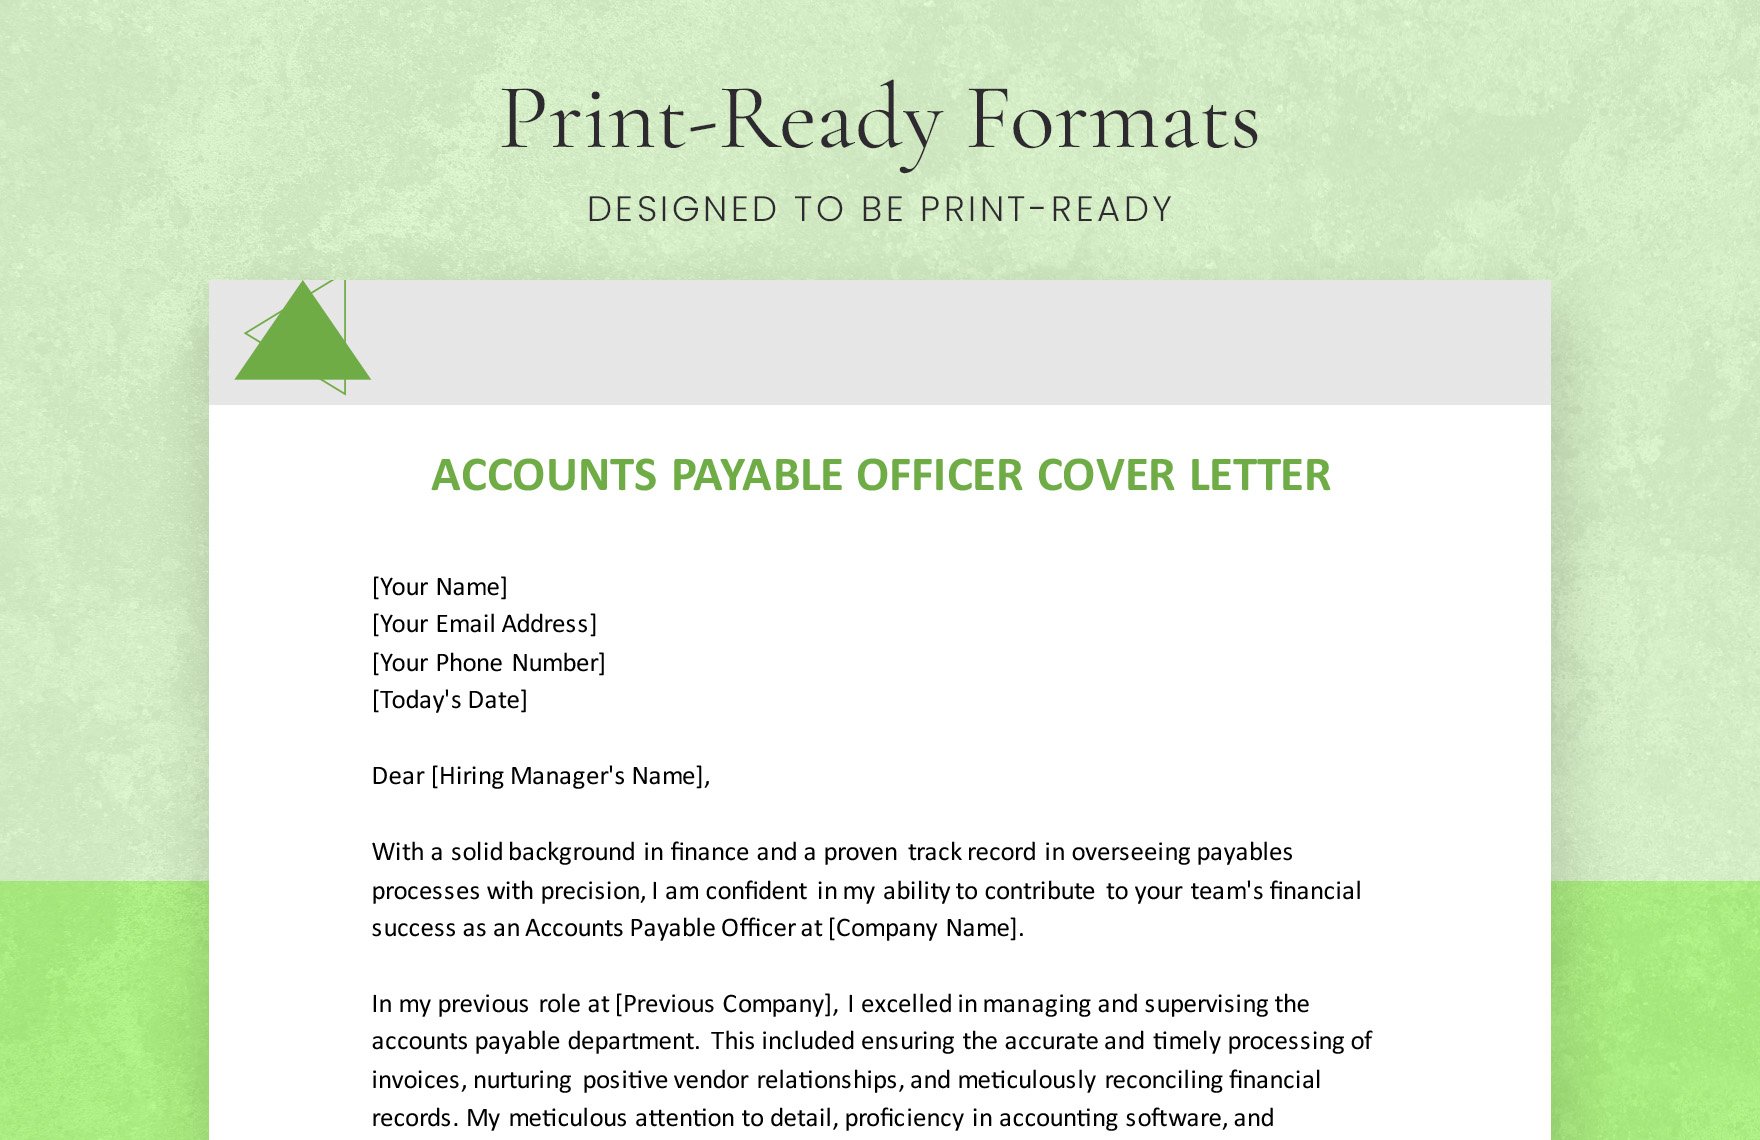 Accounts Payable Officer Cover Letter